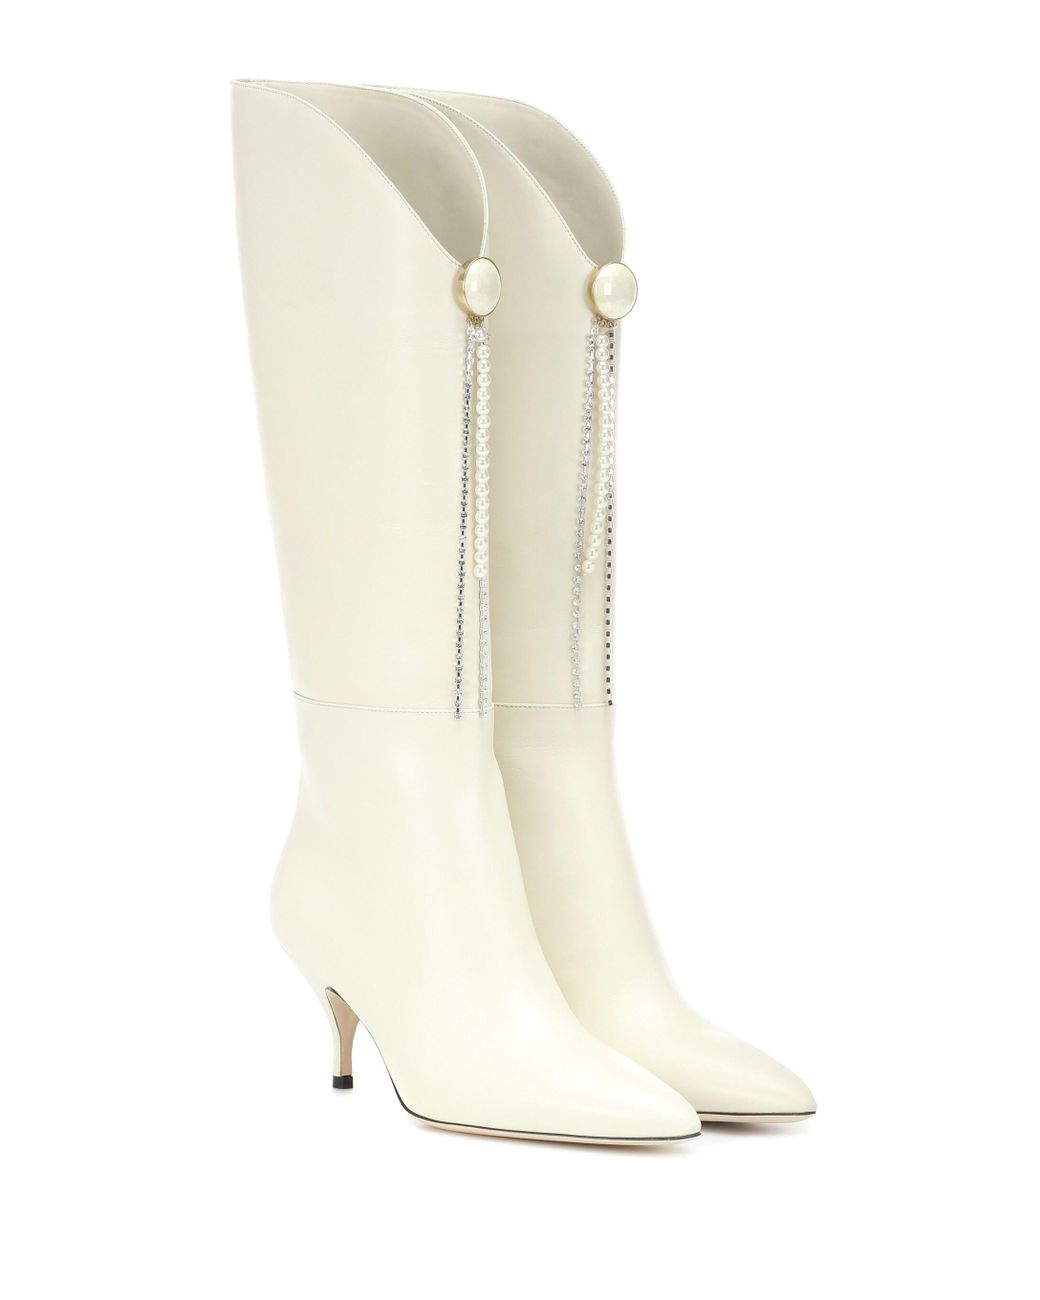 Magda Butrym Czech Leather Boots in White - Lyst